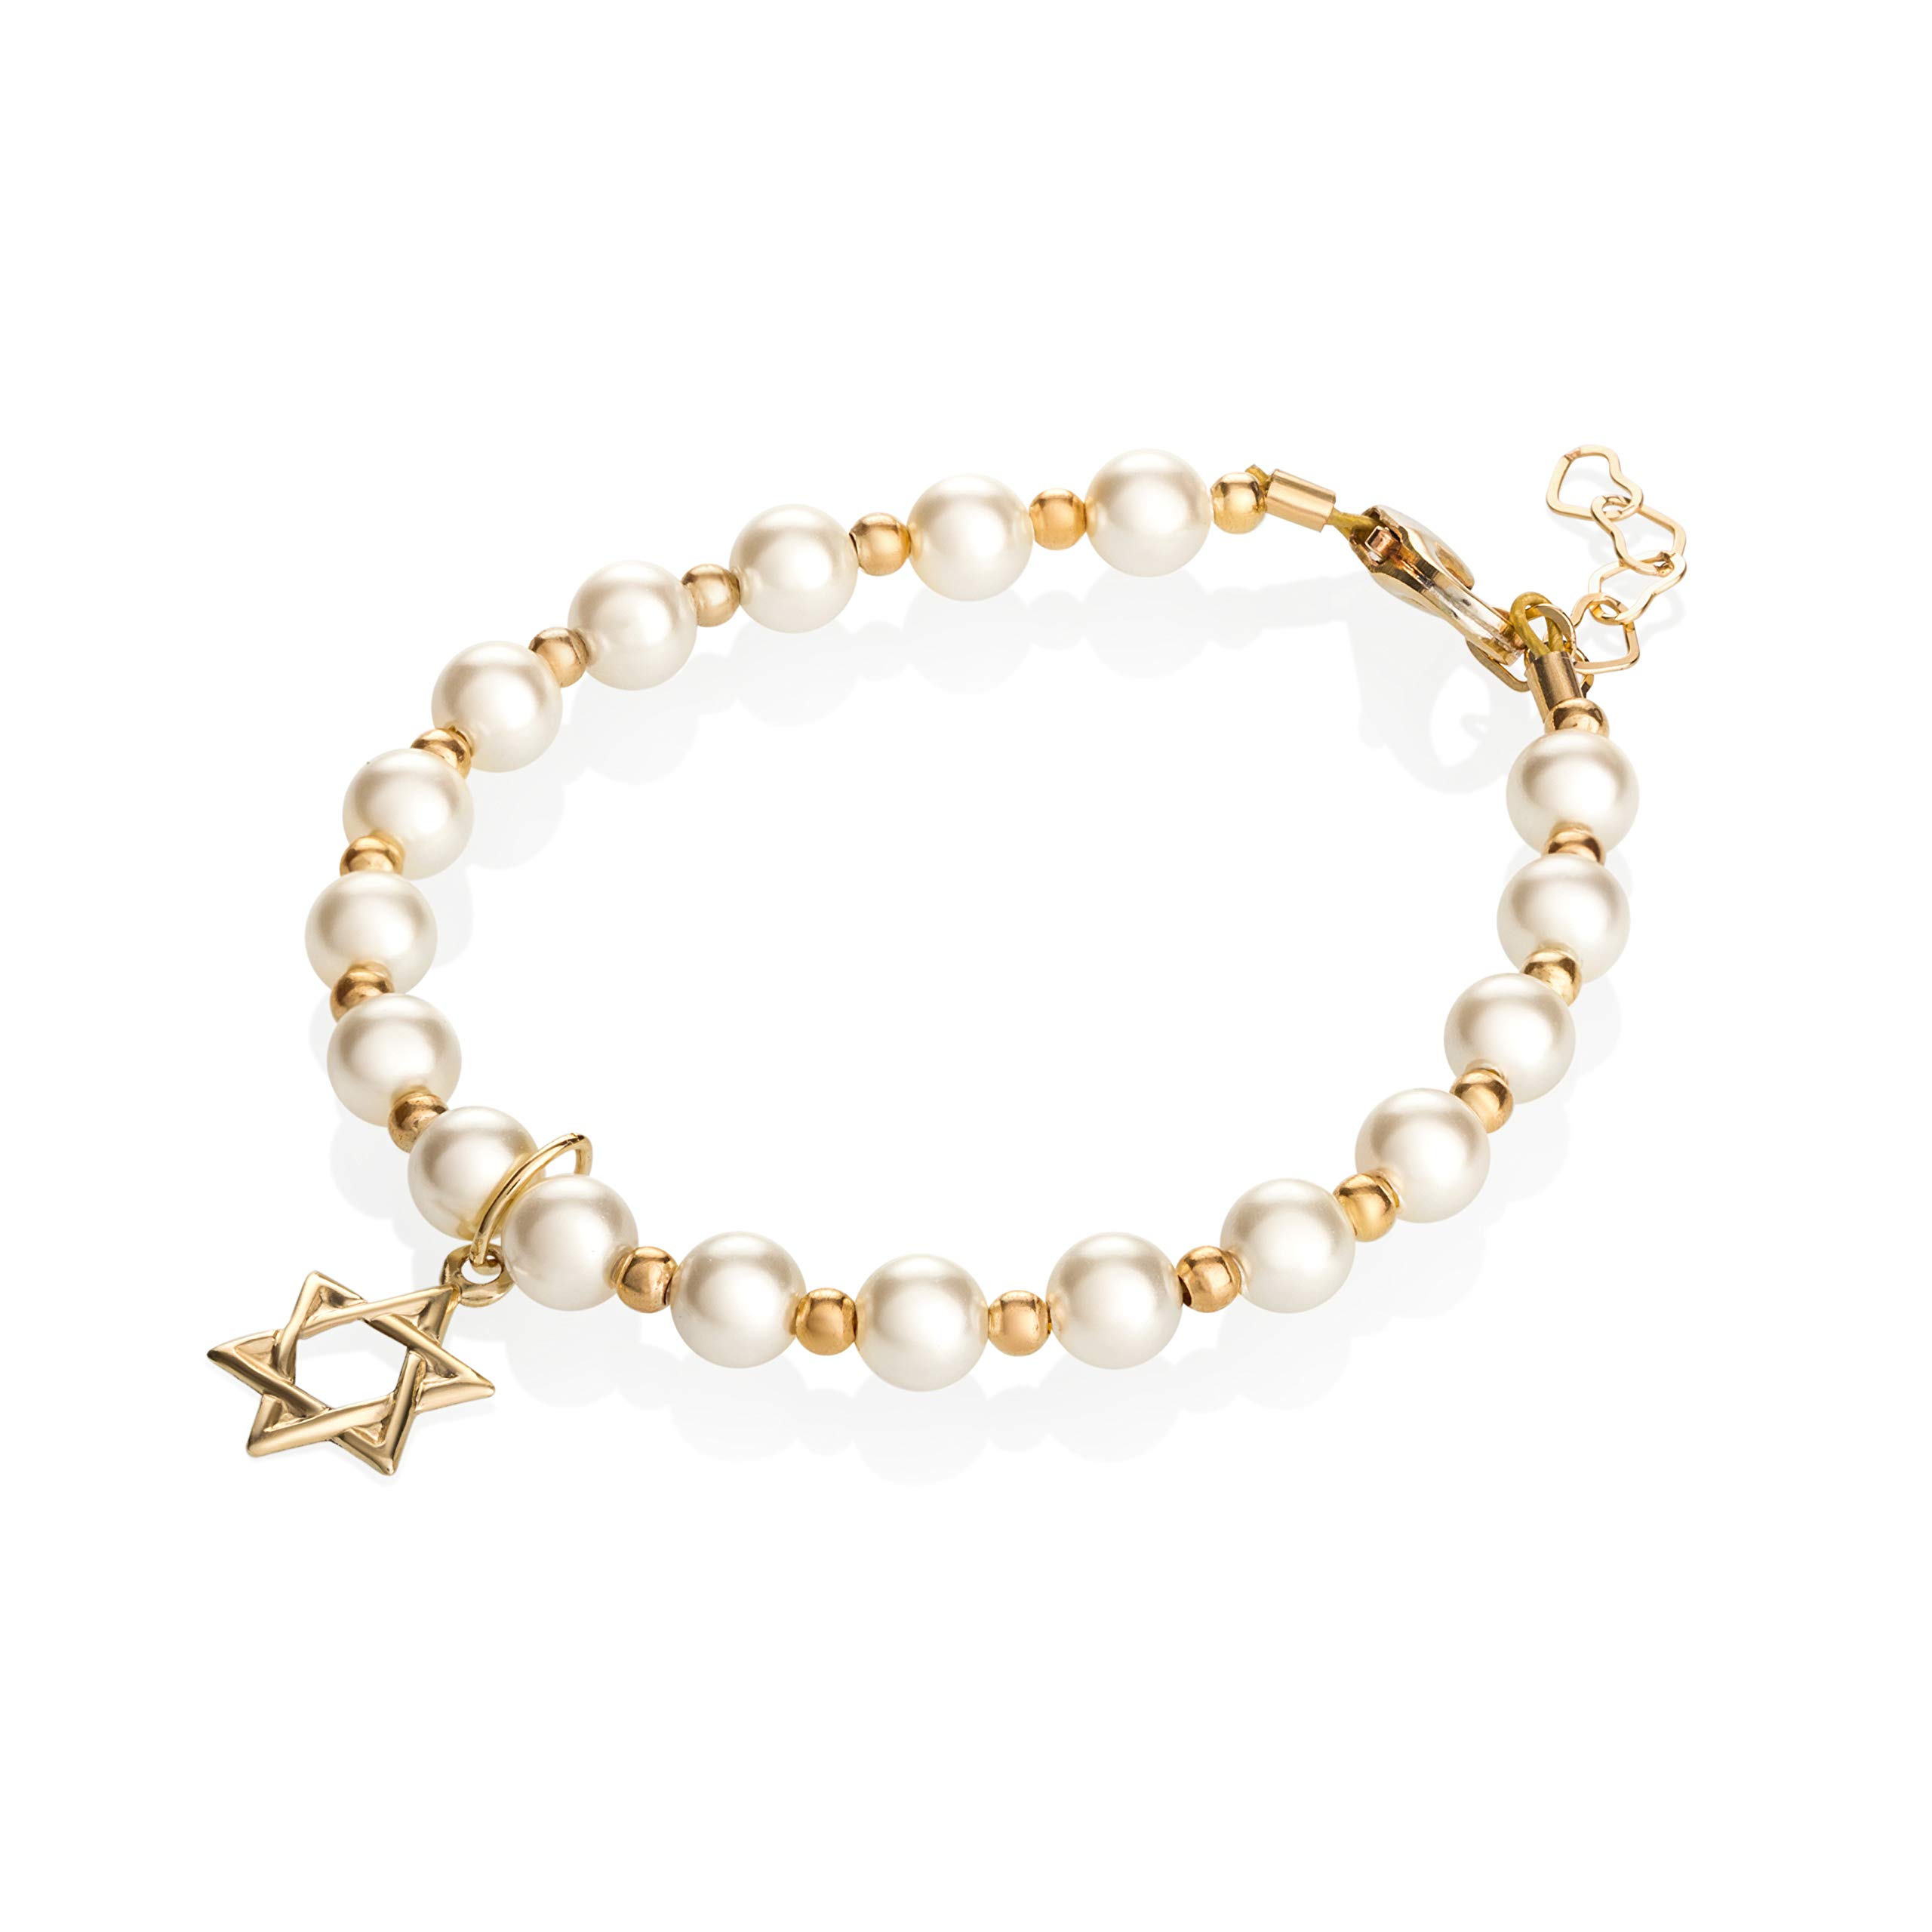 Crystal Dream Luxury 14KT Gold-Filled Beads with Cream European Simulated Pearls and Star of David Charm Stylish Unisex Baby Bracelet (BGSD)